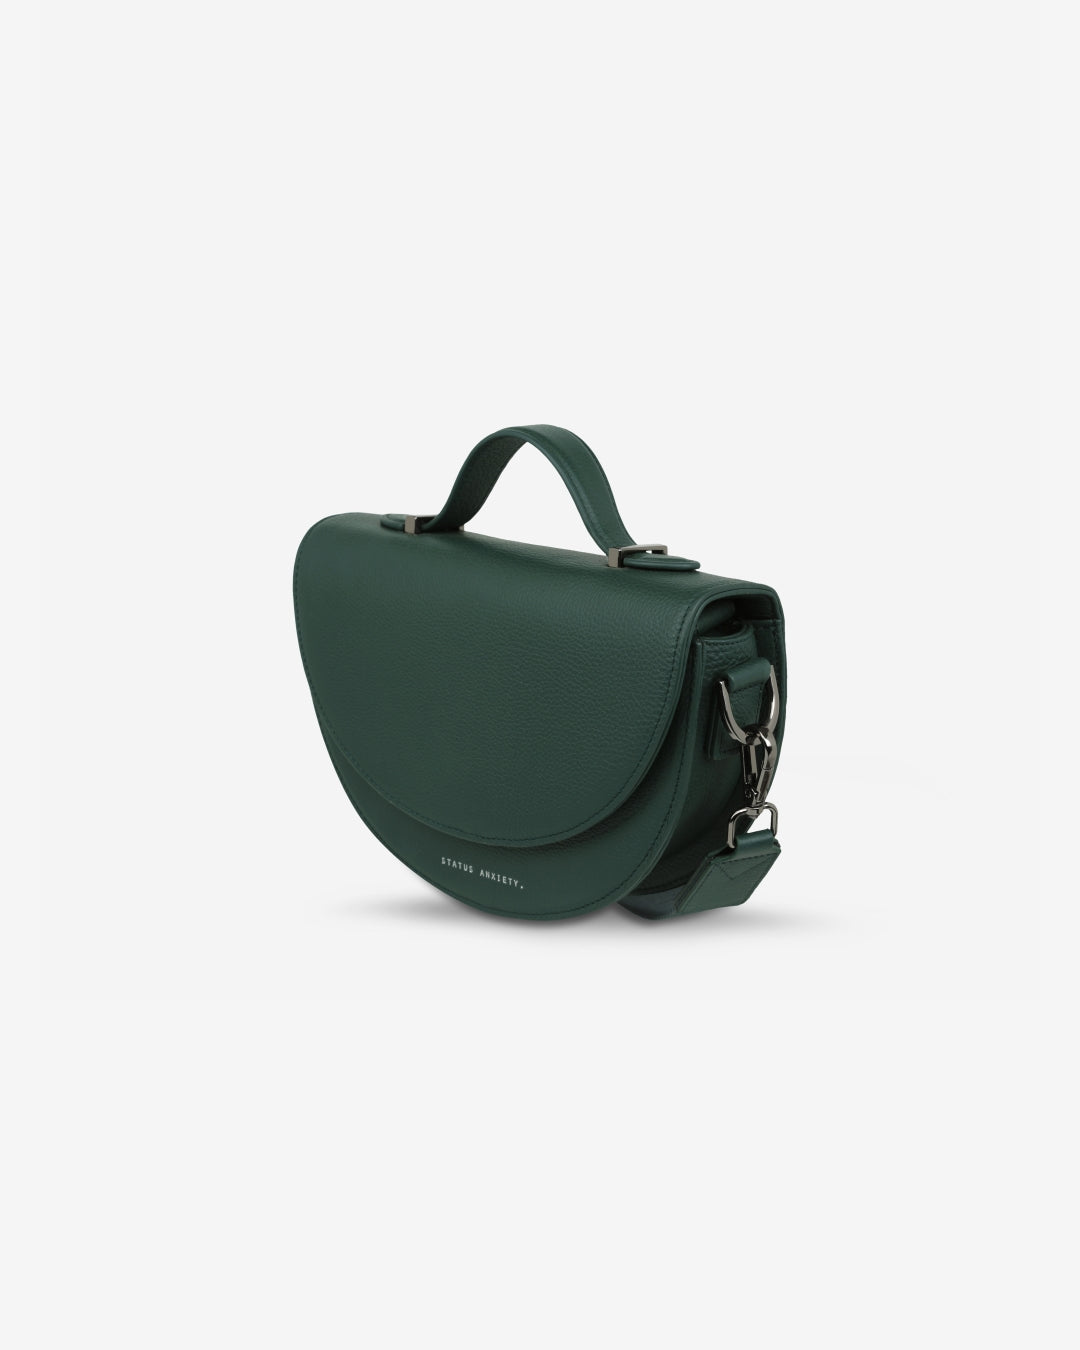 All Nighter - Green W/ Webbed Strap [PRE ORDER]